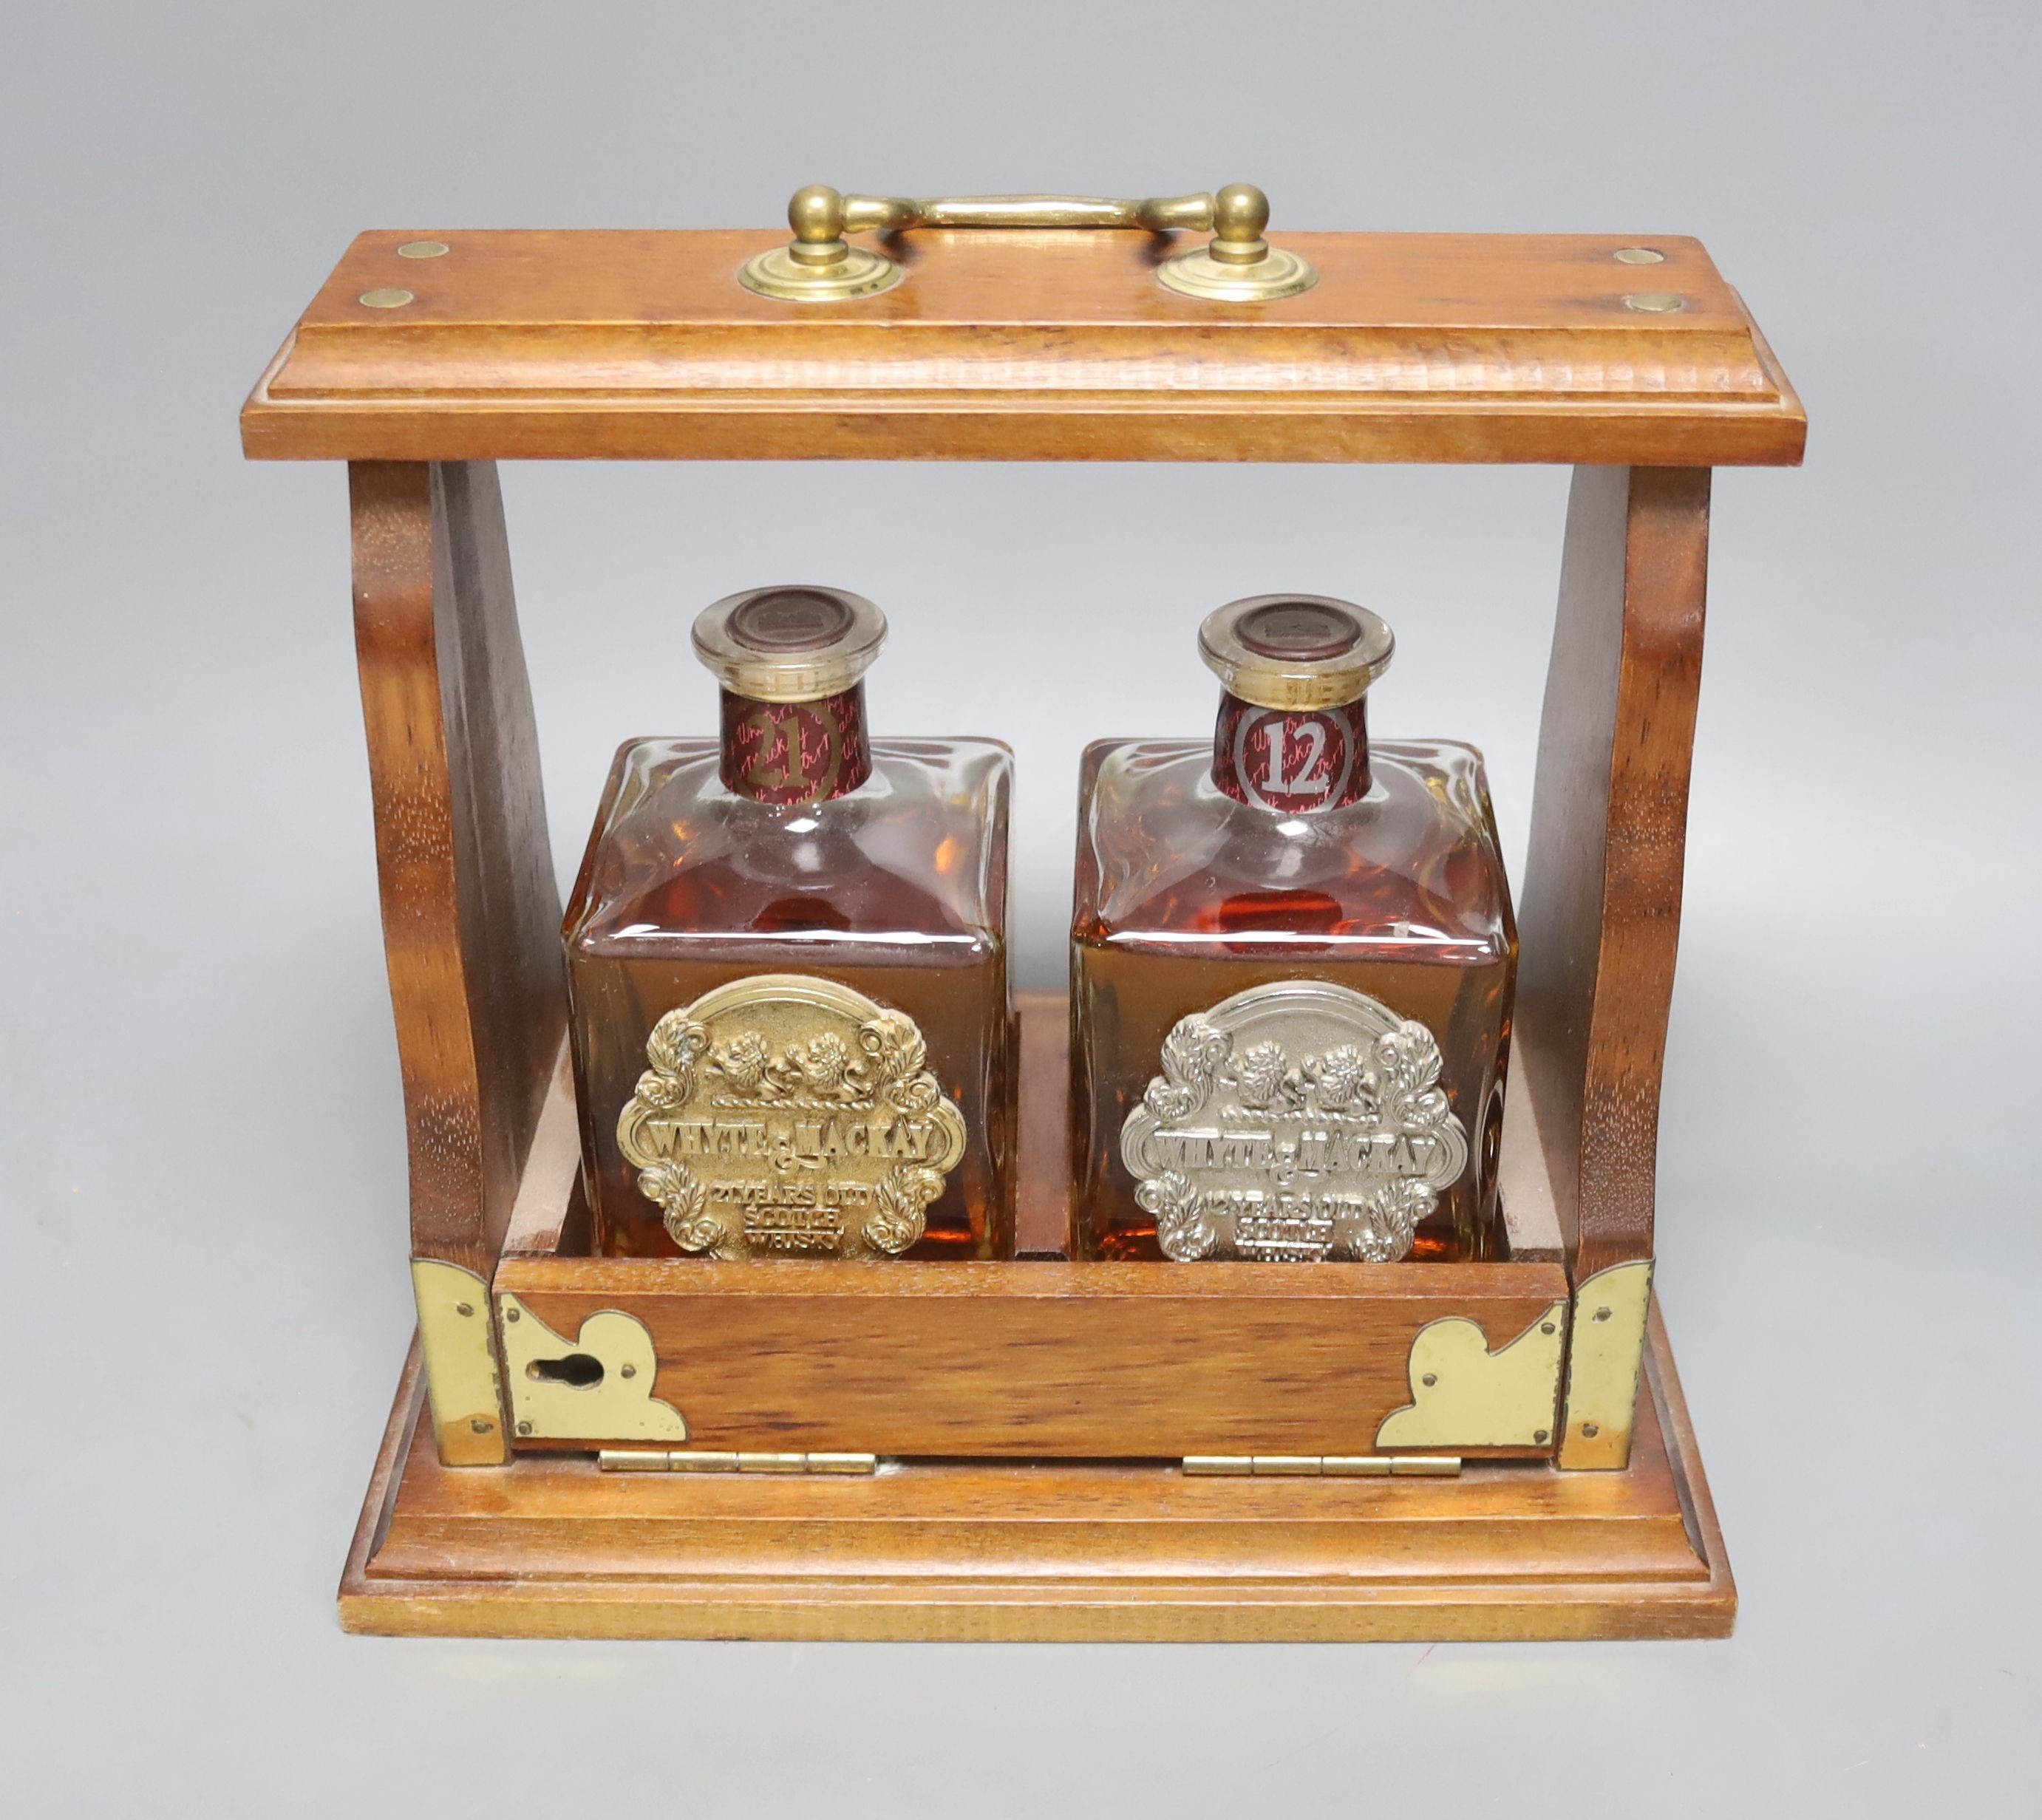 Tantalus containing White and Mockay 21 year and 12 year whiskey, 23 cms high.